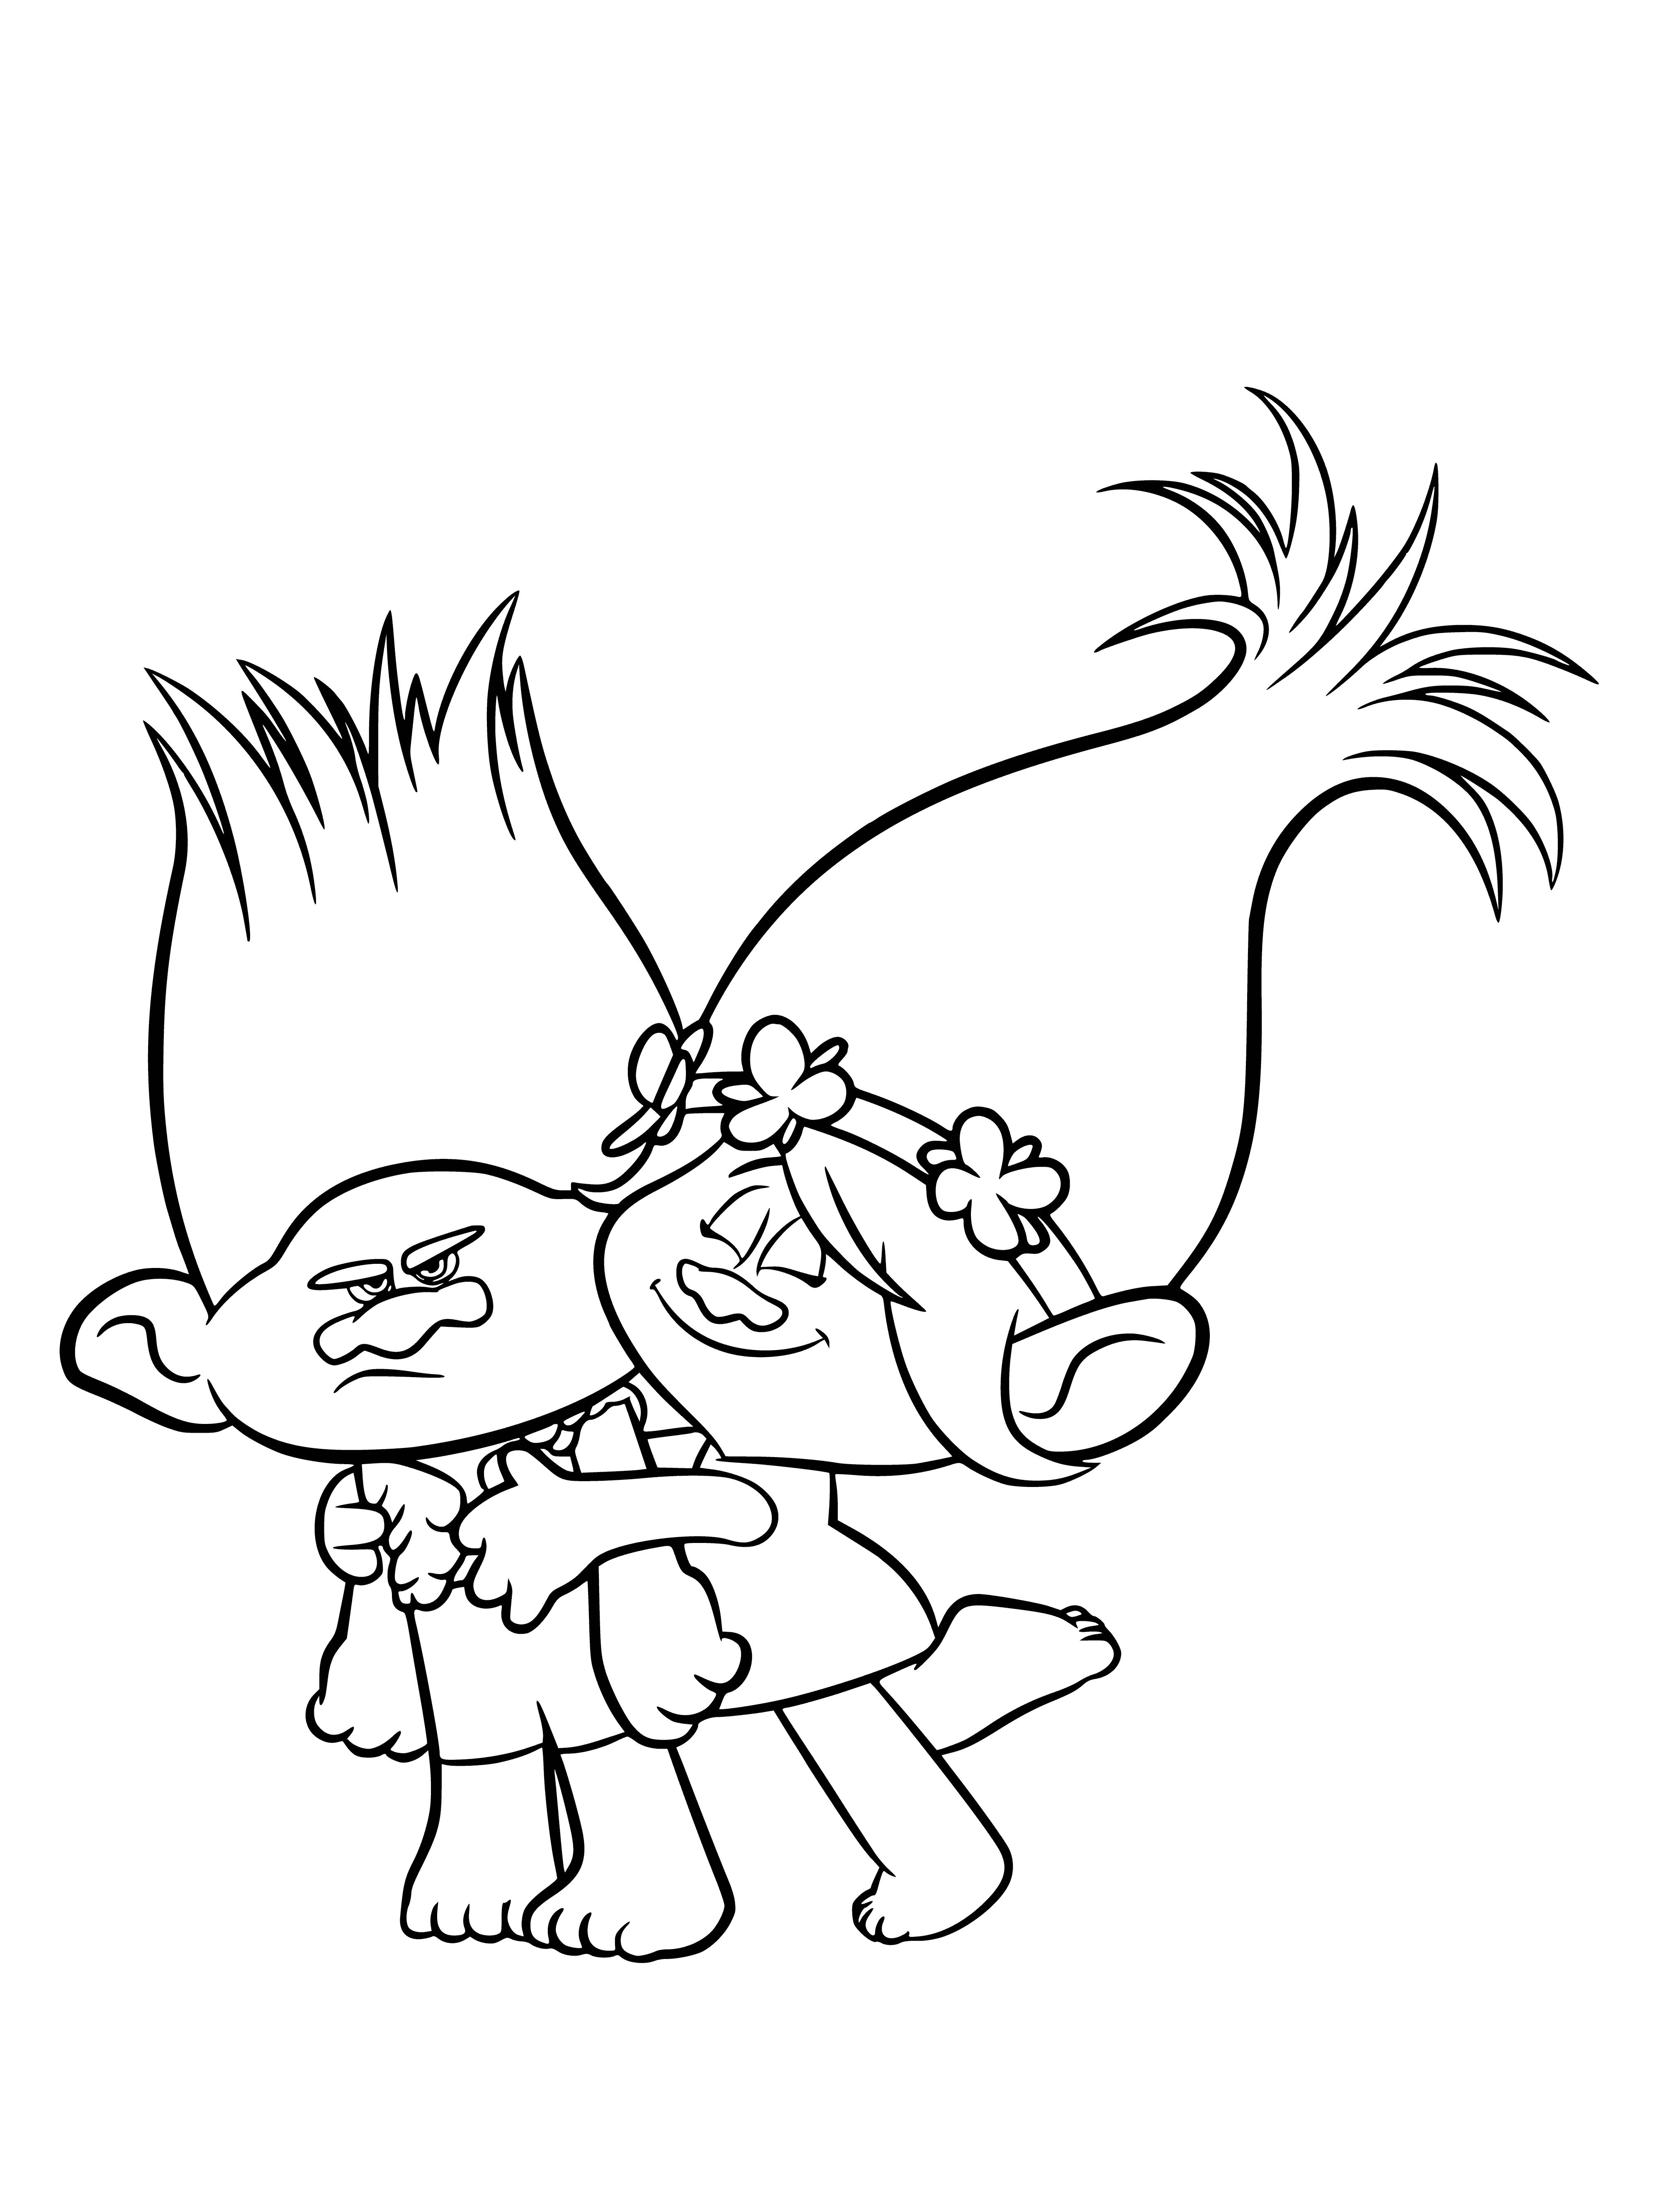 coloring page: Two trolls smile and hold hands, one yellow and orange, other purple and blue. They wear unique clothes and have big noses and pointed ears.